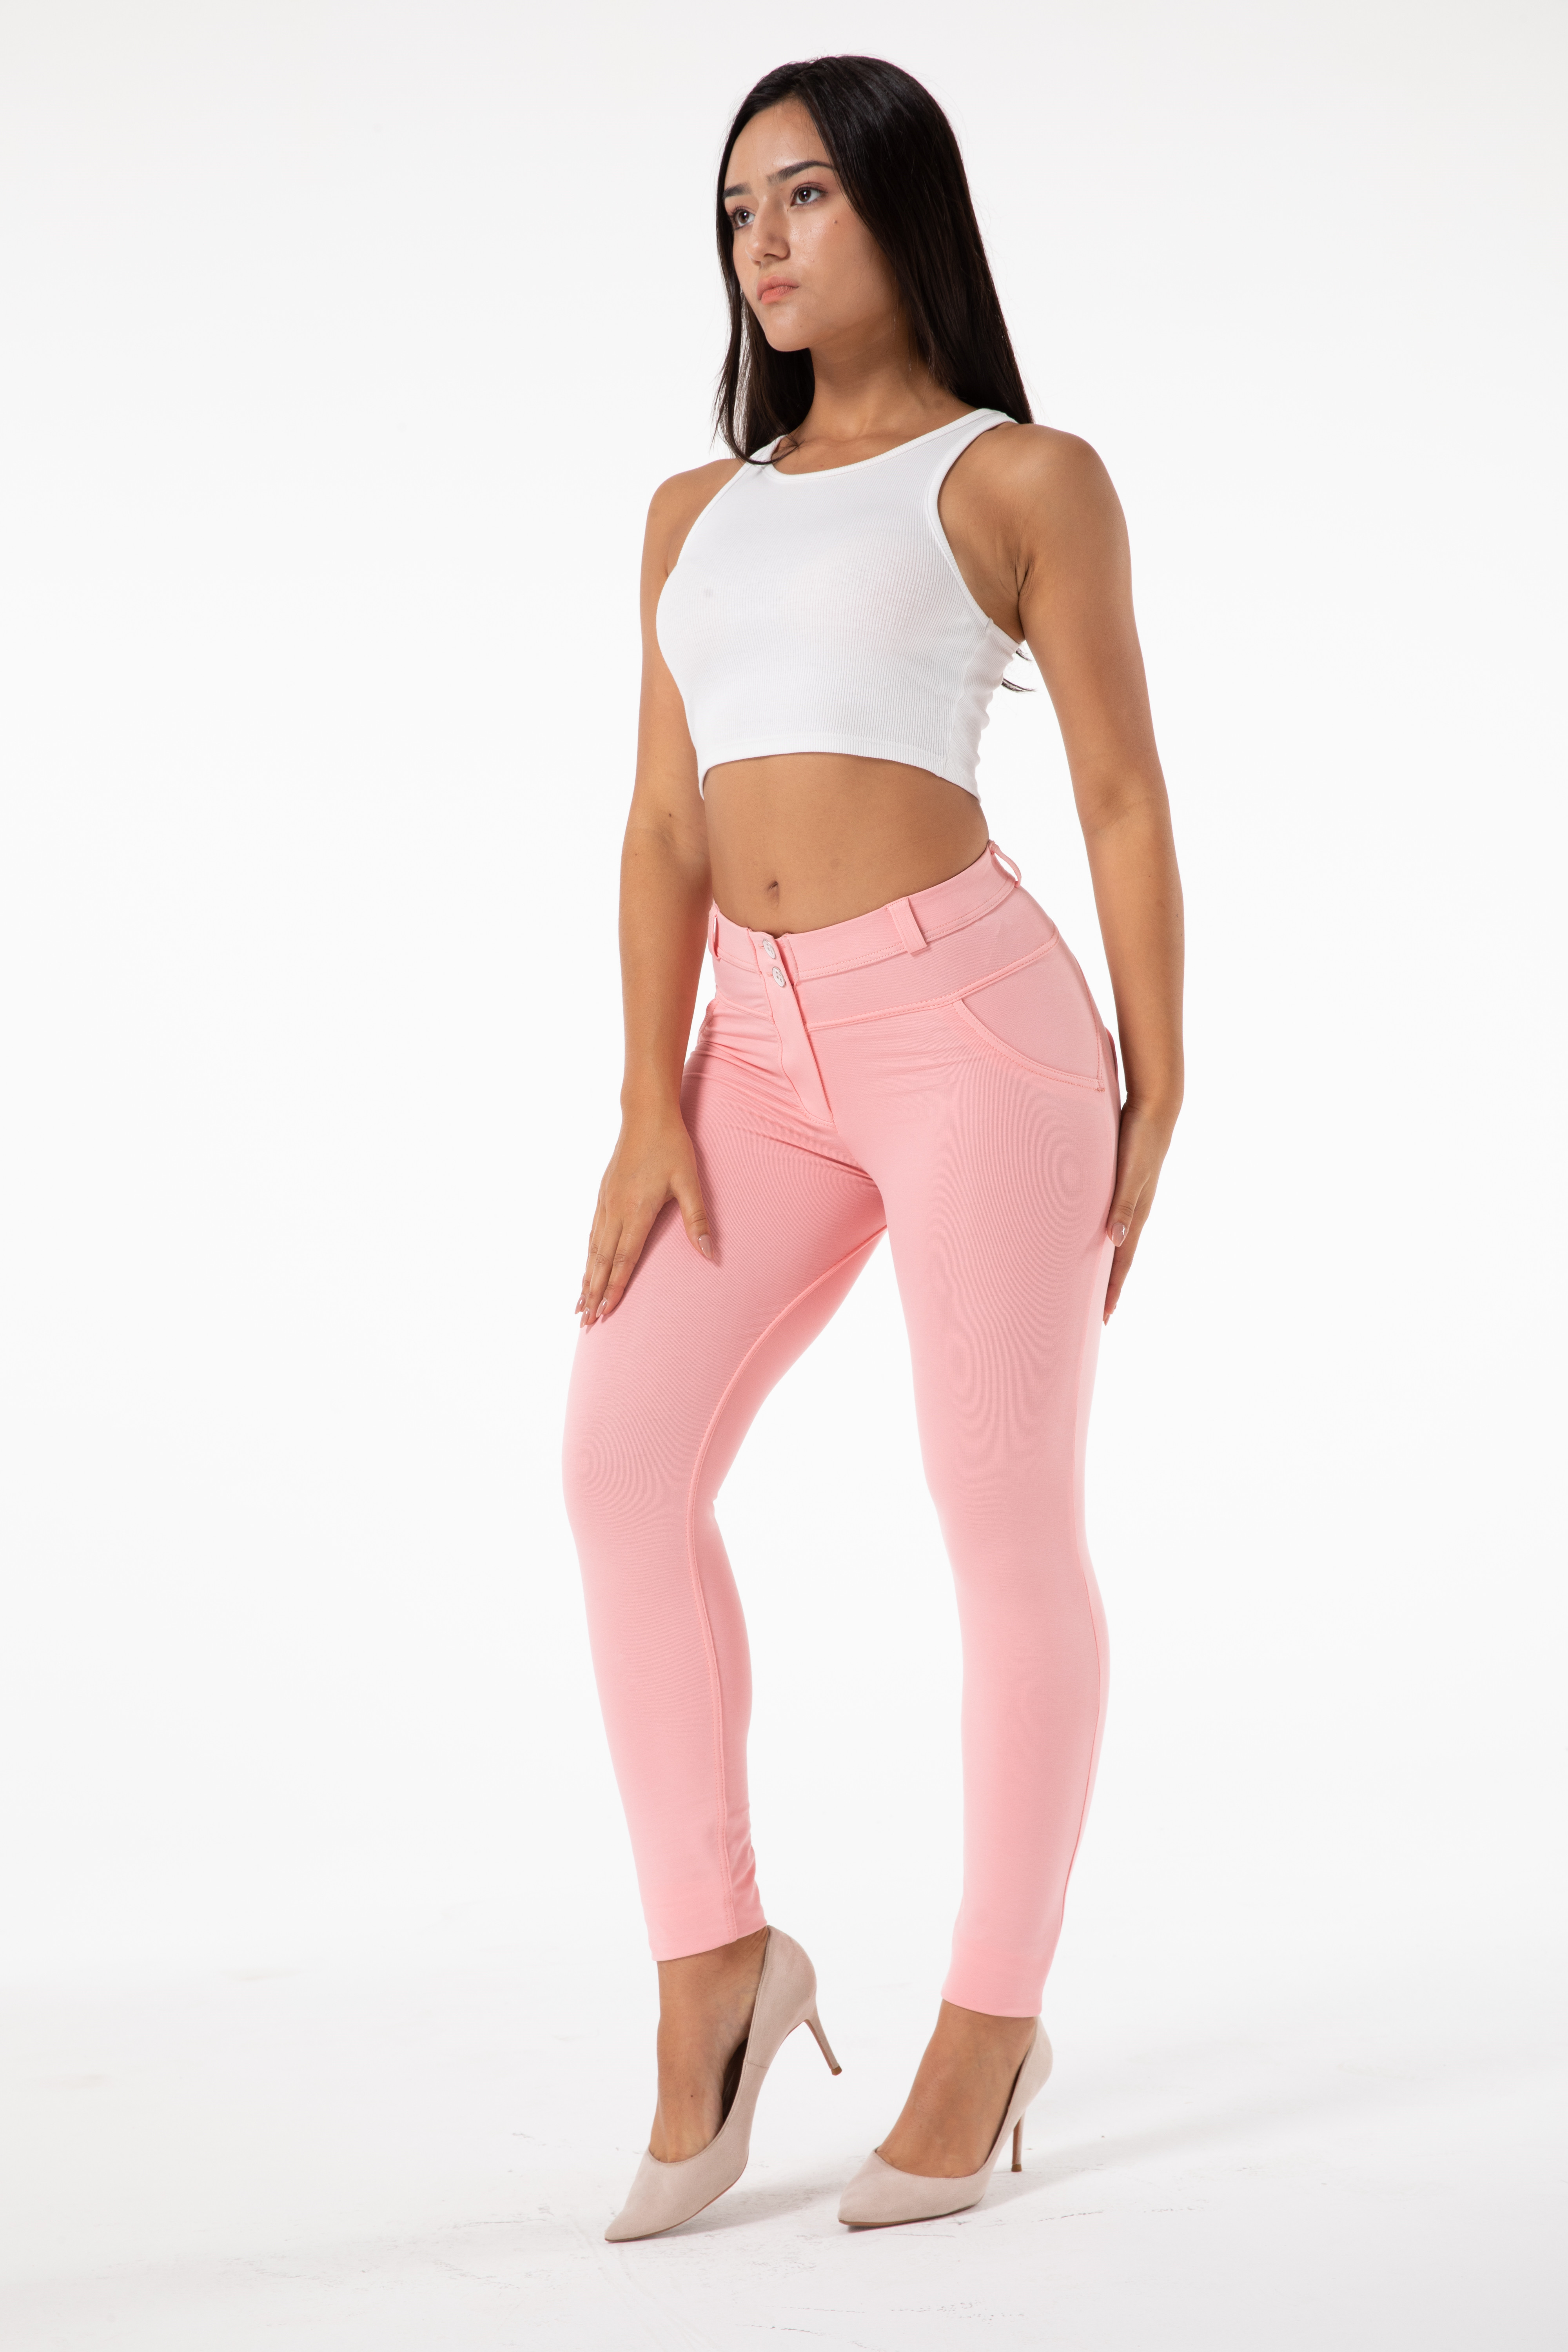 Shascullfites Melody High Waisted Compression Leggings Women